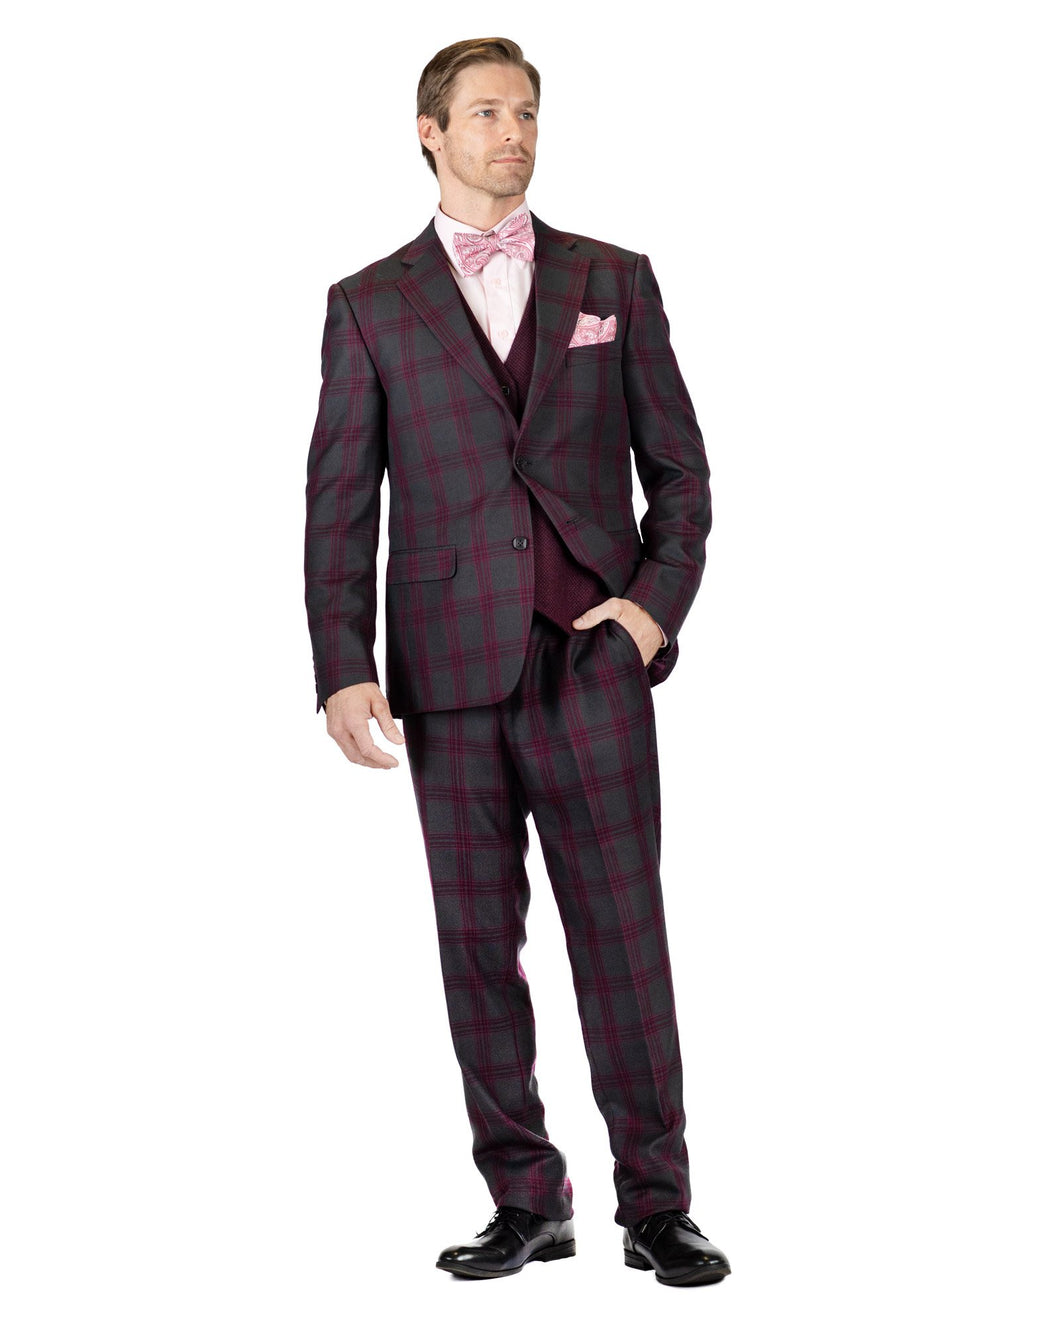 Stacy Adams Single Breasted 2 Button Grey 3PC Suit - 9170 BUD REVO